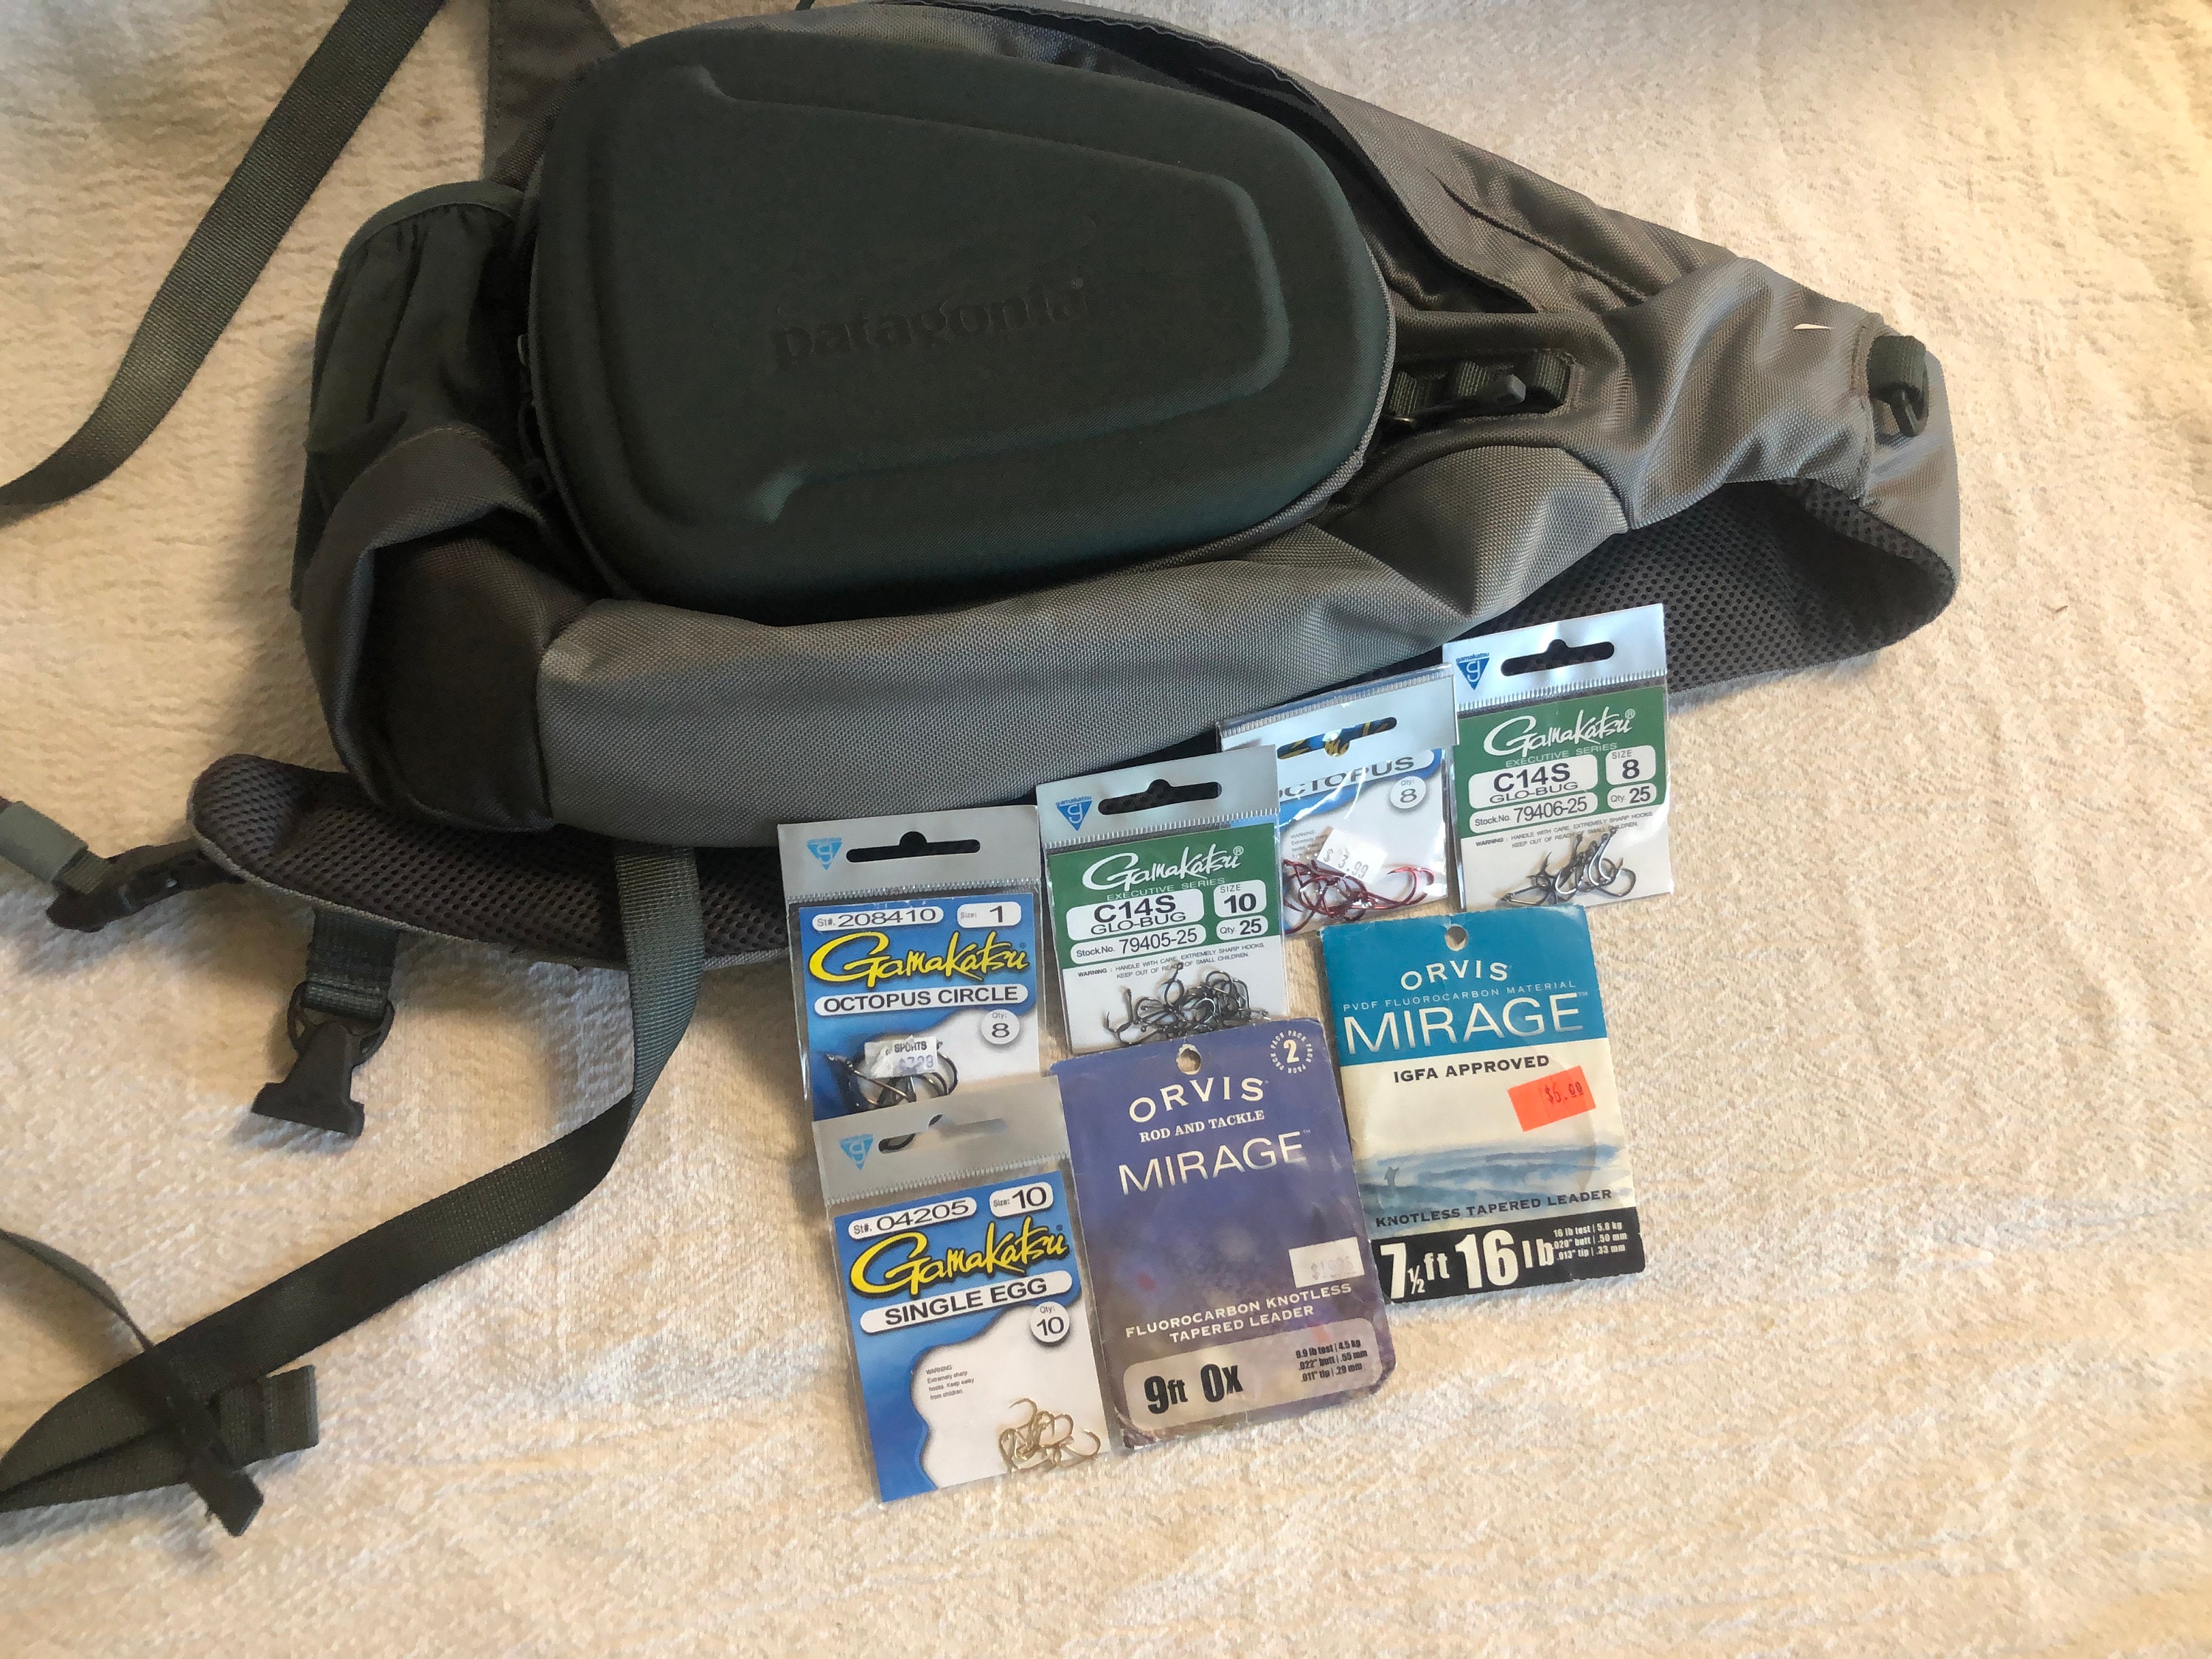 Patagonia Fly Fishing Stealth Atom Sling Pack with various packs of fishing  leads. Leads are New never opened.